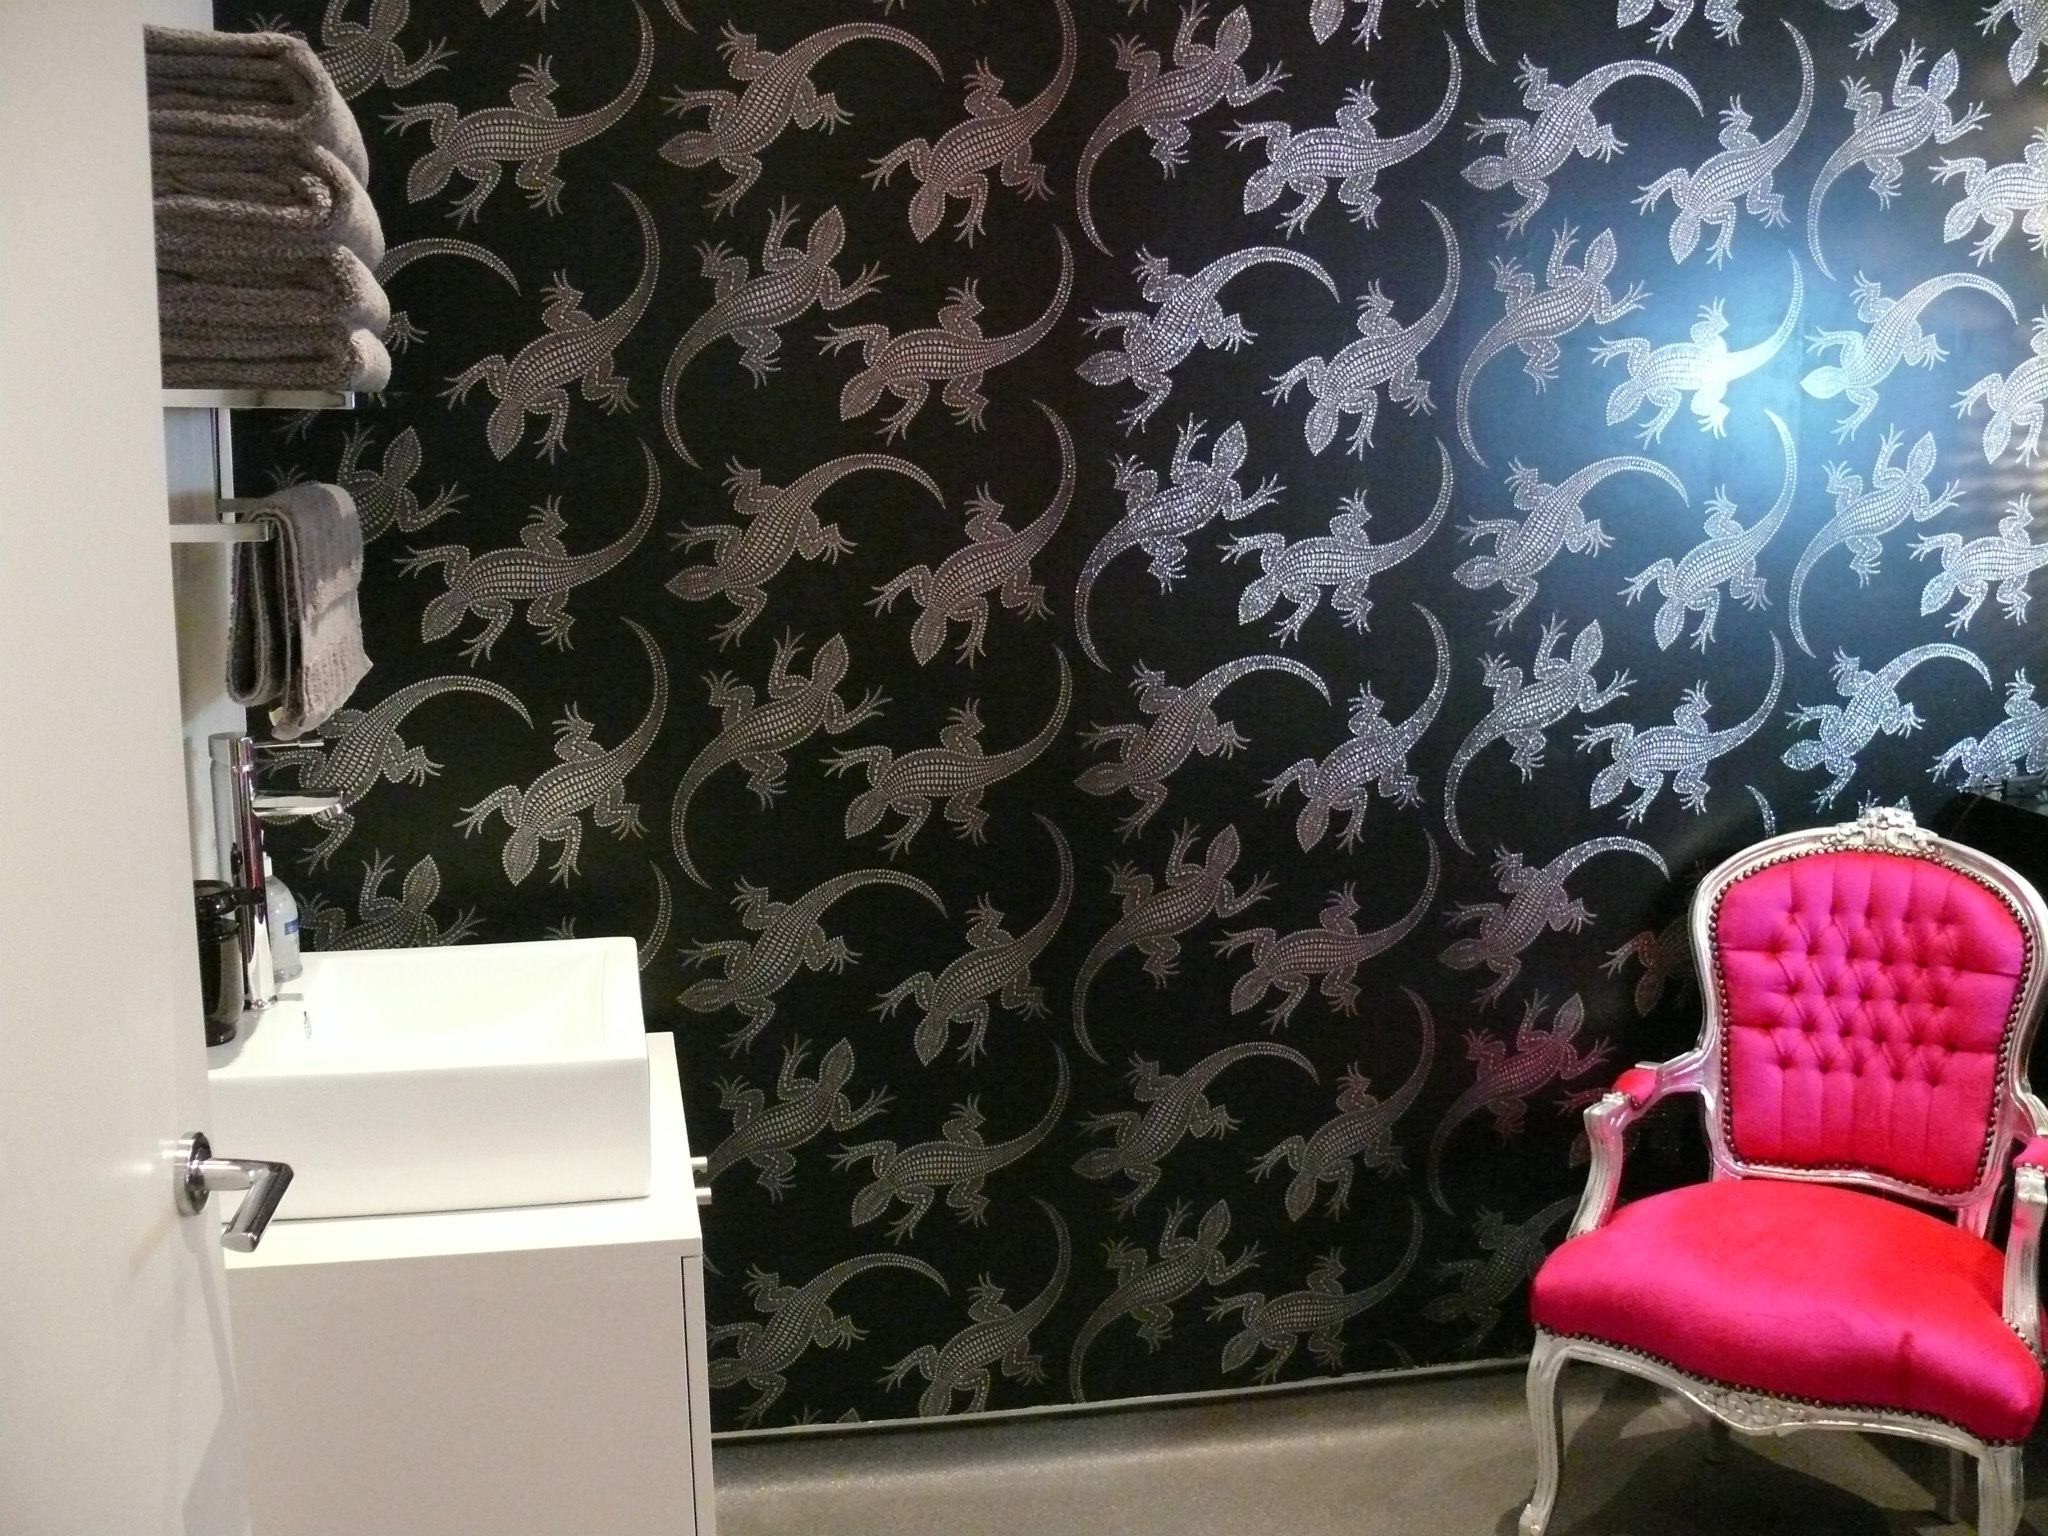 2048x1536 Komodo Holographic wallpaper- IEOL-W6300/02 used in the skinlounge-Richmond.